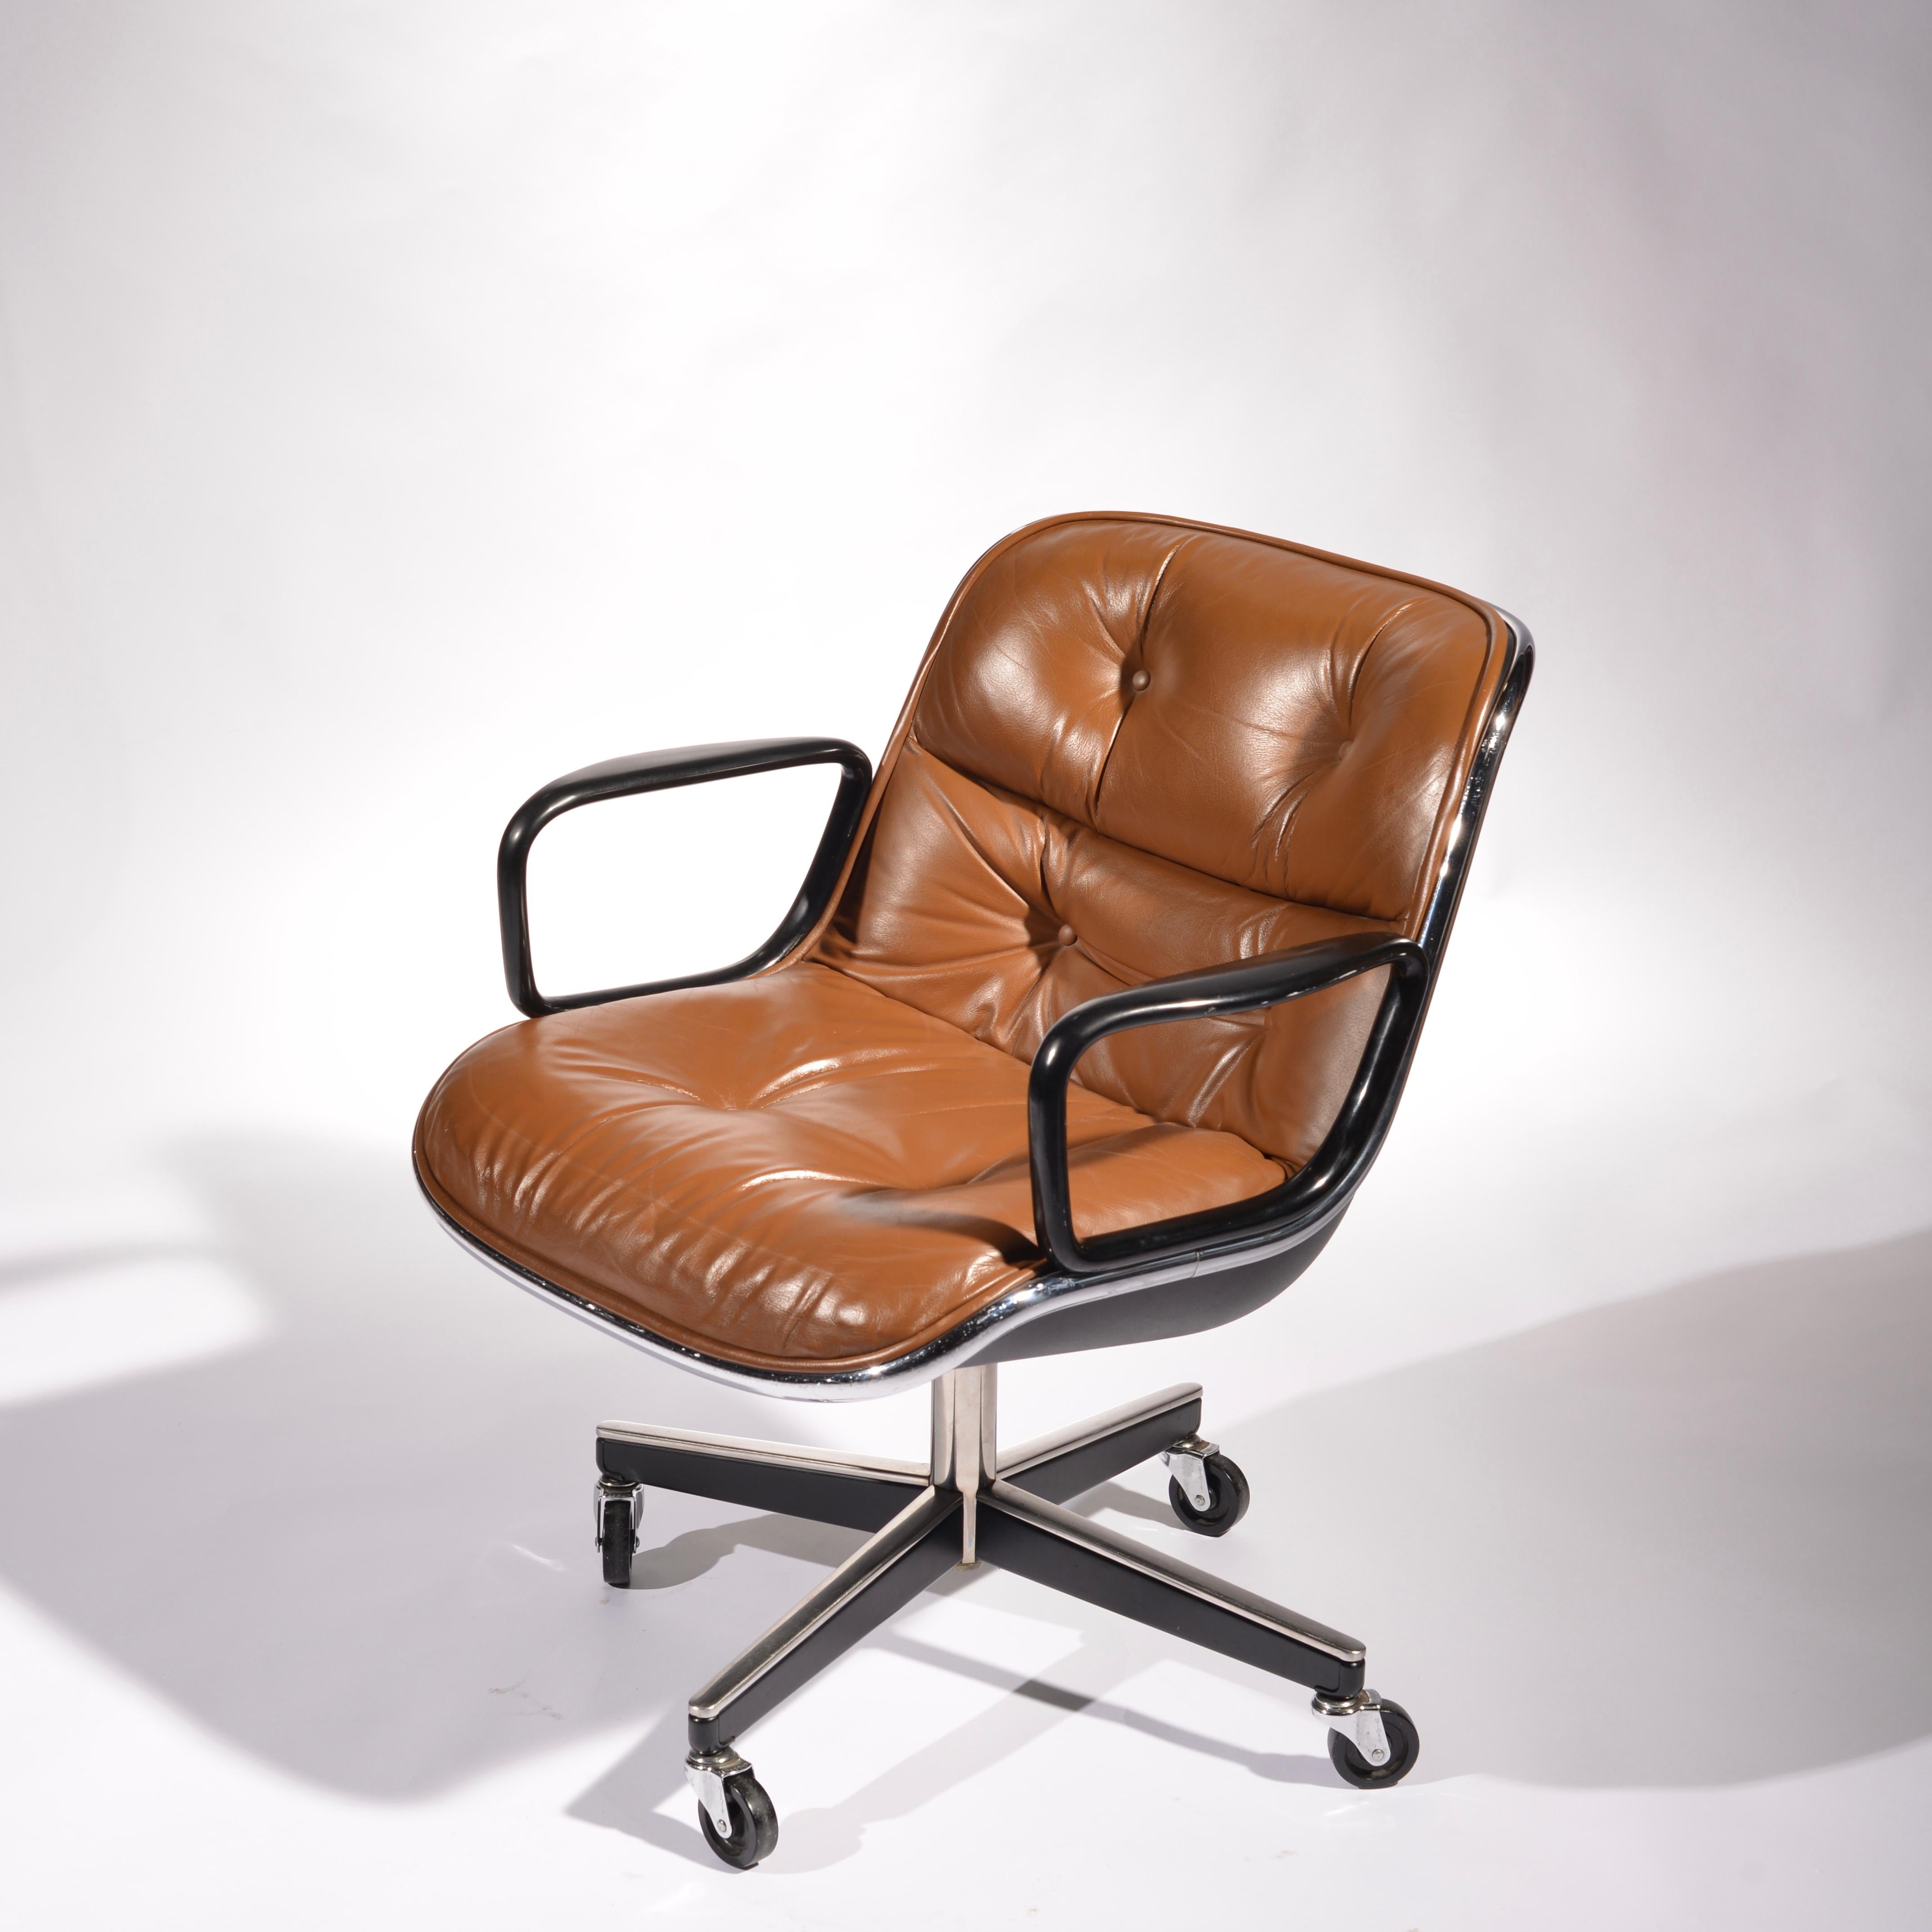 Mid-20th Century 16 Charles Pollock Executive Desk Chairs for Knoll in Cognac Leather